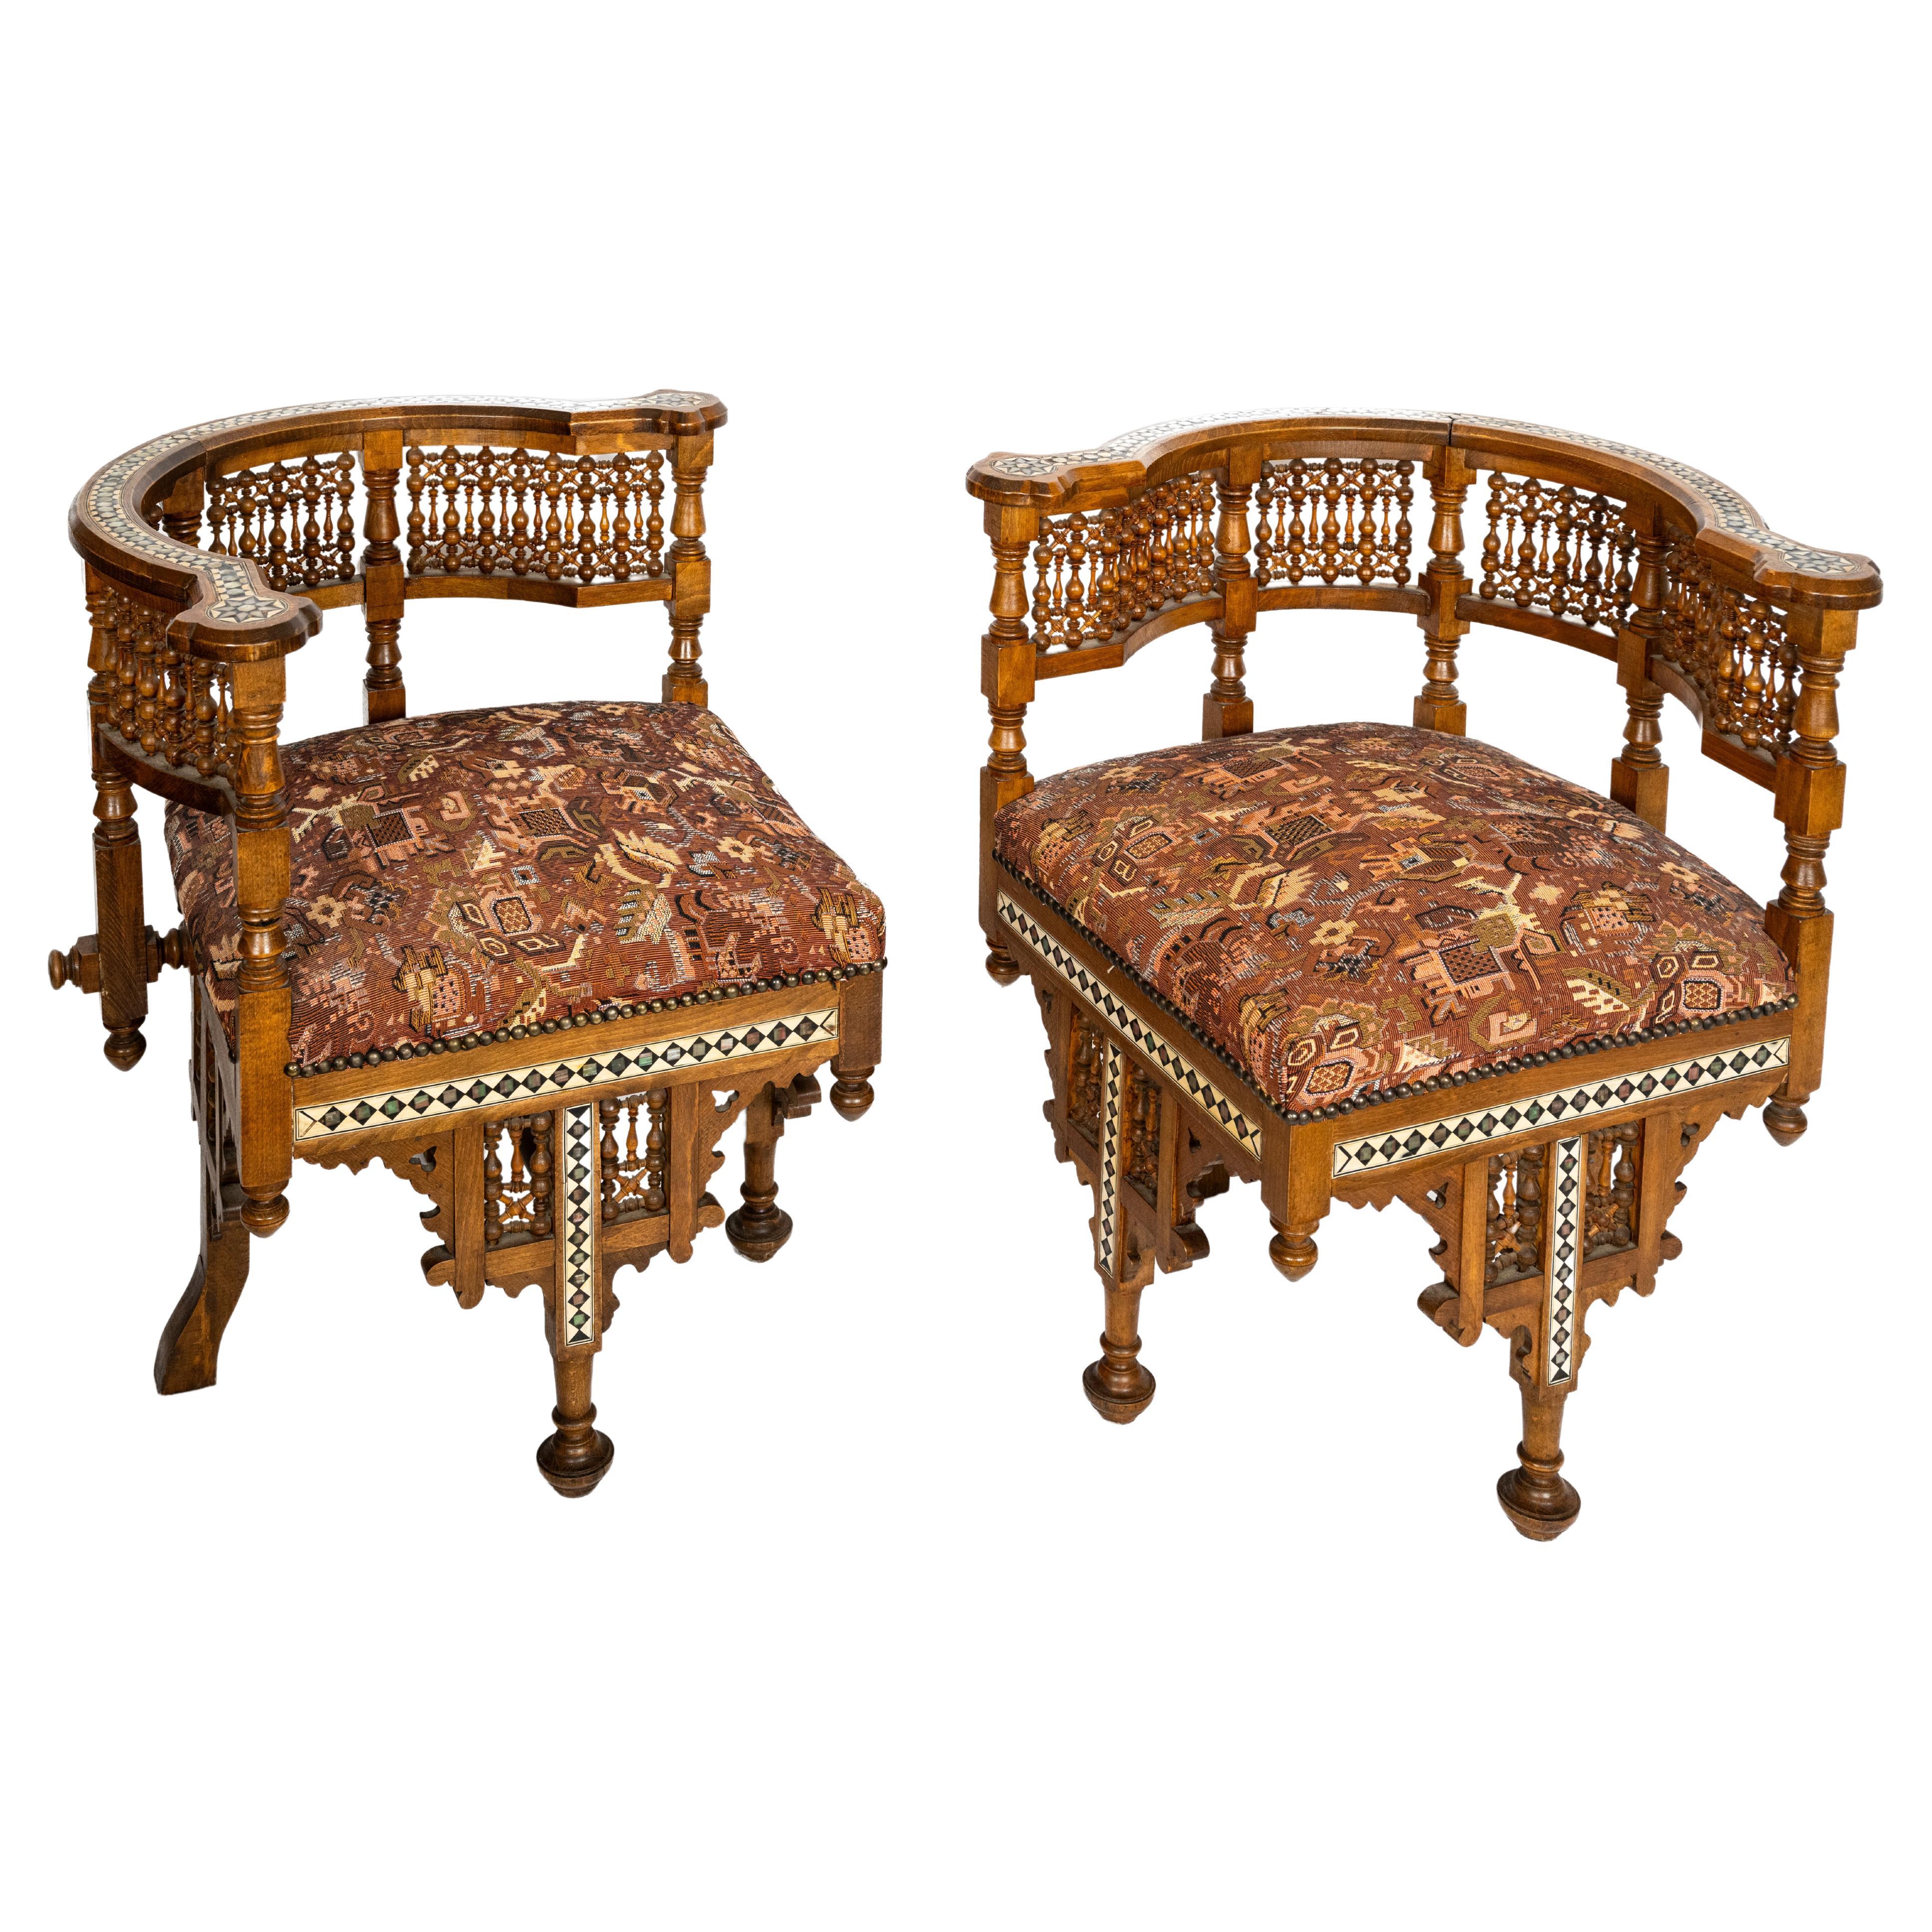 A Pair of Moorish-Style American Open Arm Chairs